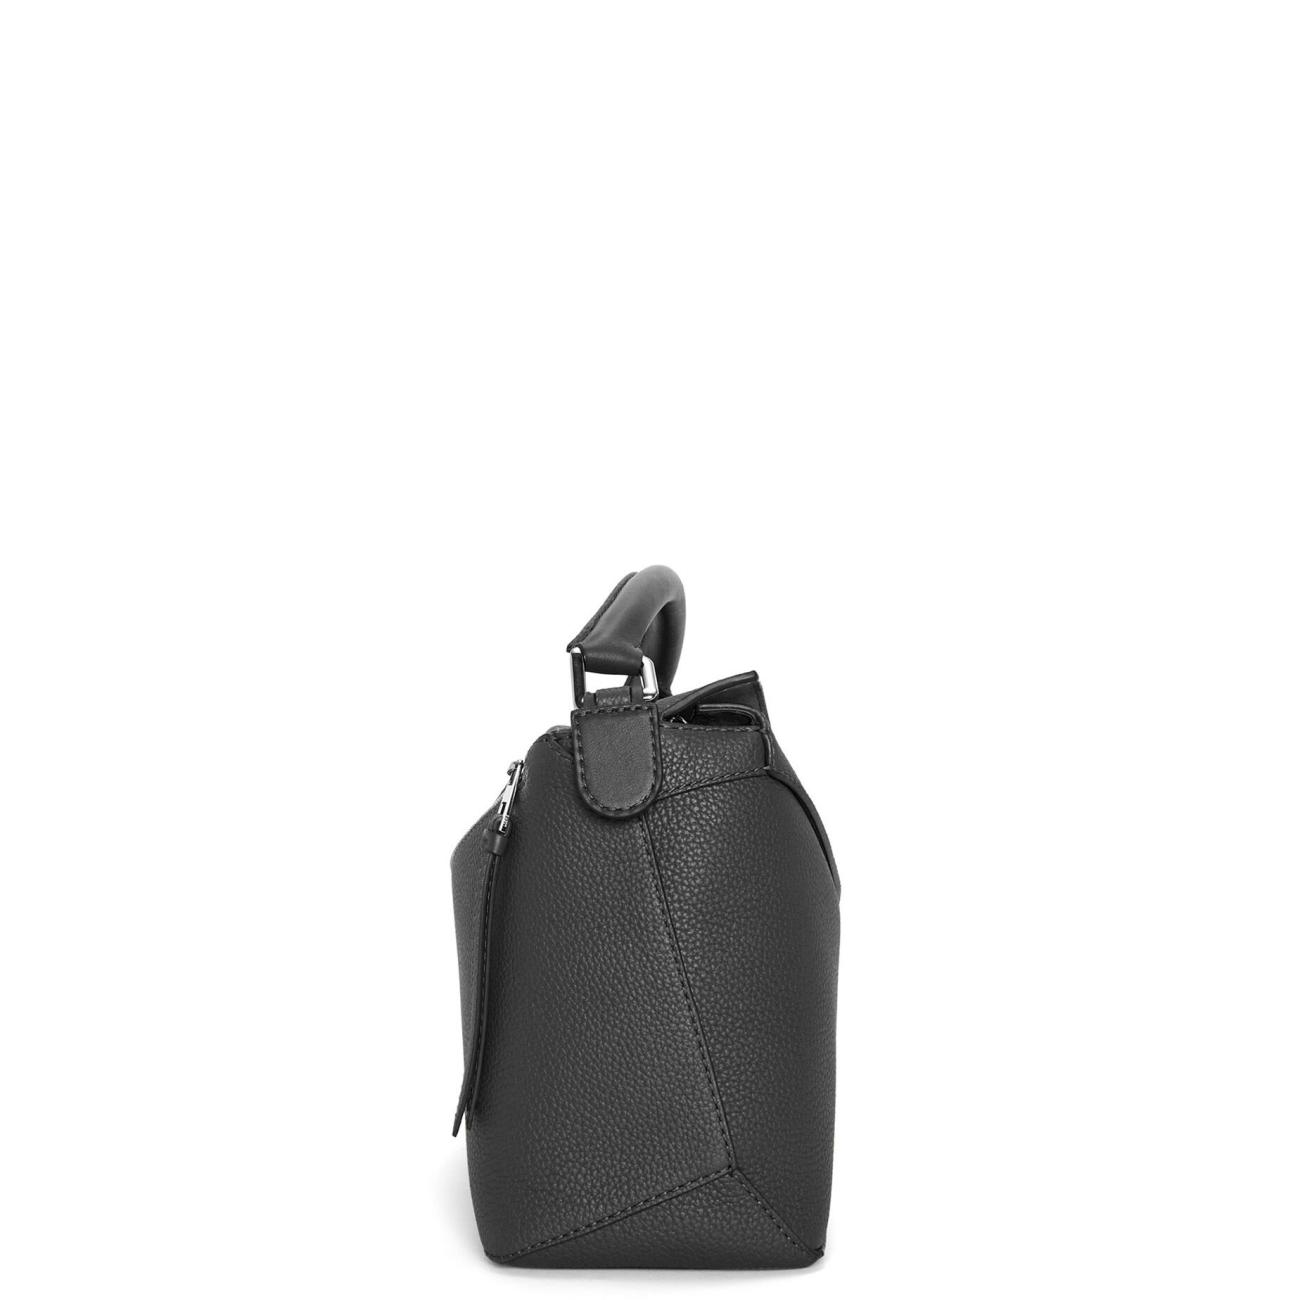 Puzzle bag in grained calfskin